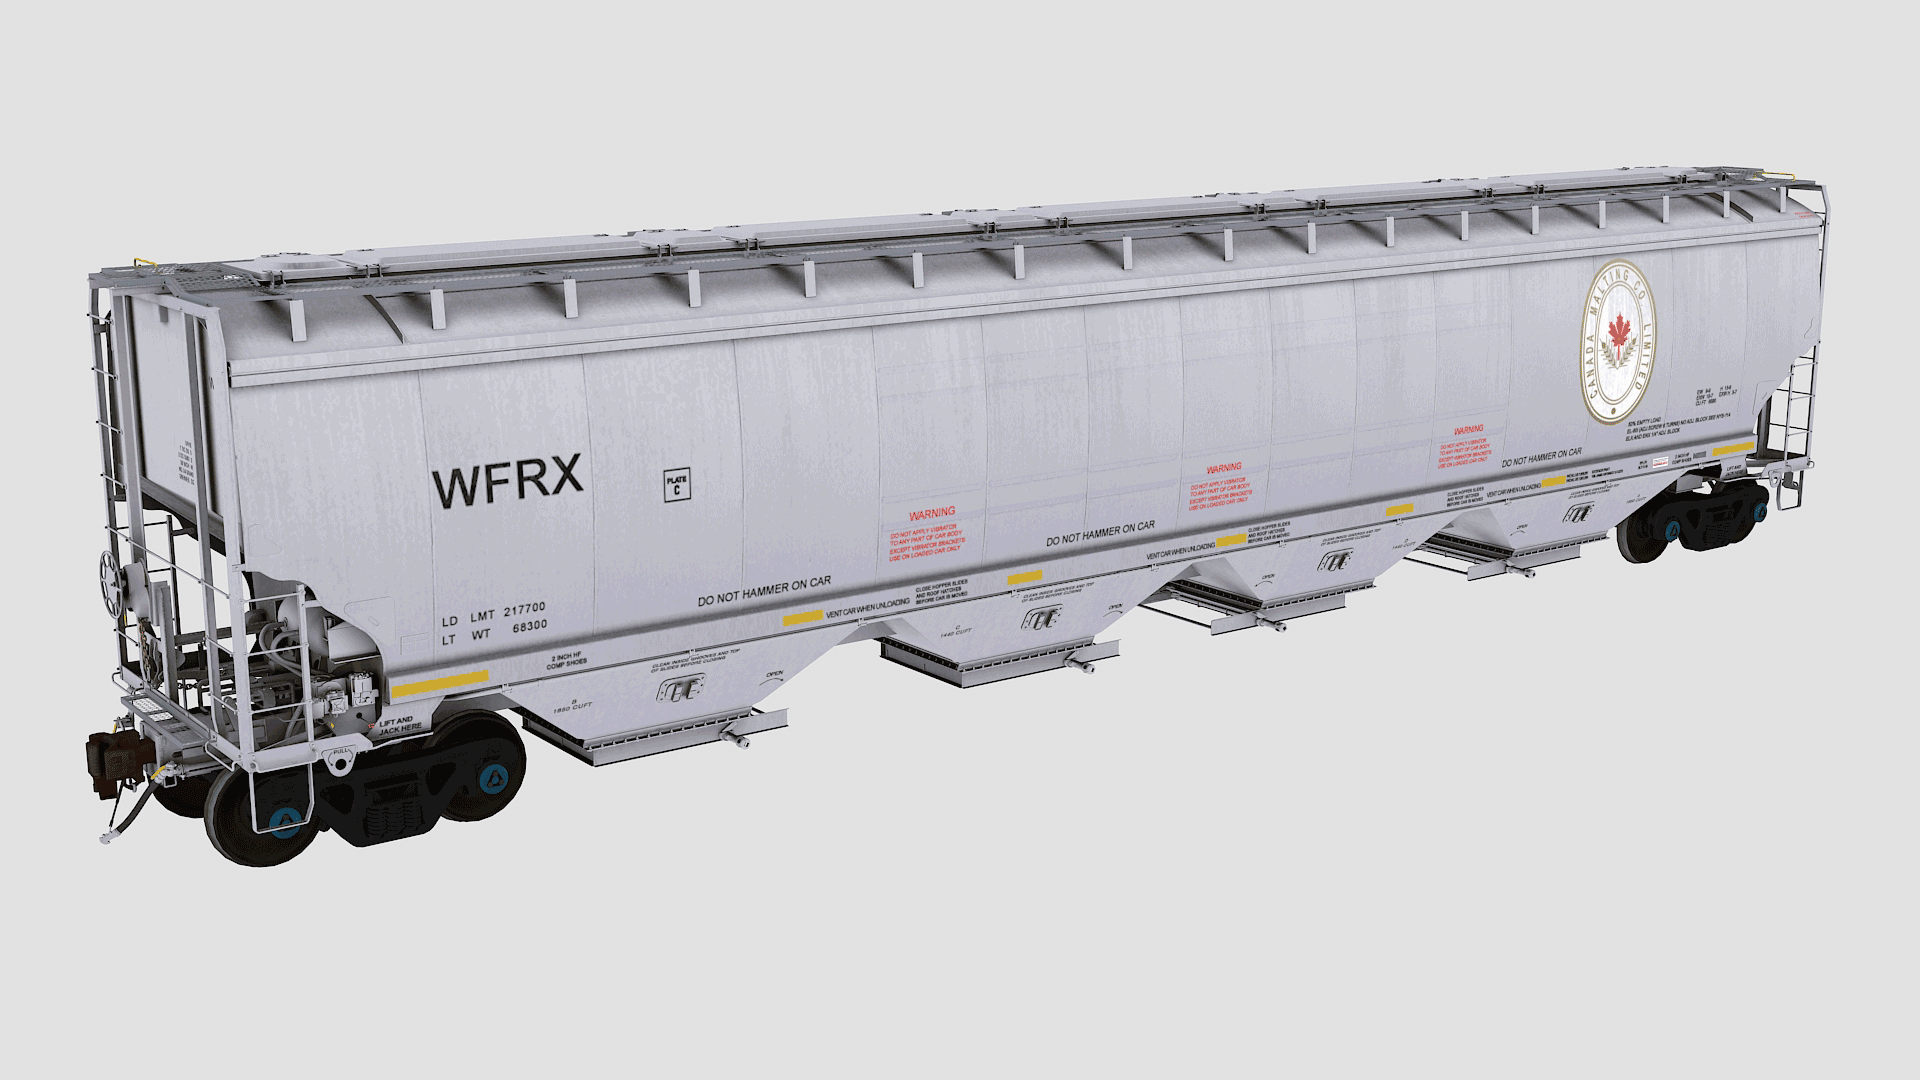 Wfrx is a prototype scaled model